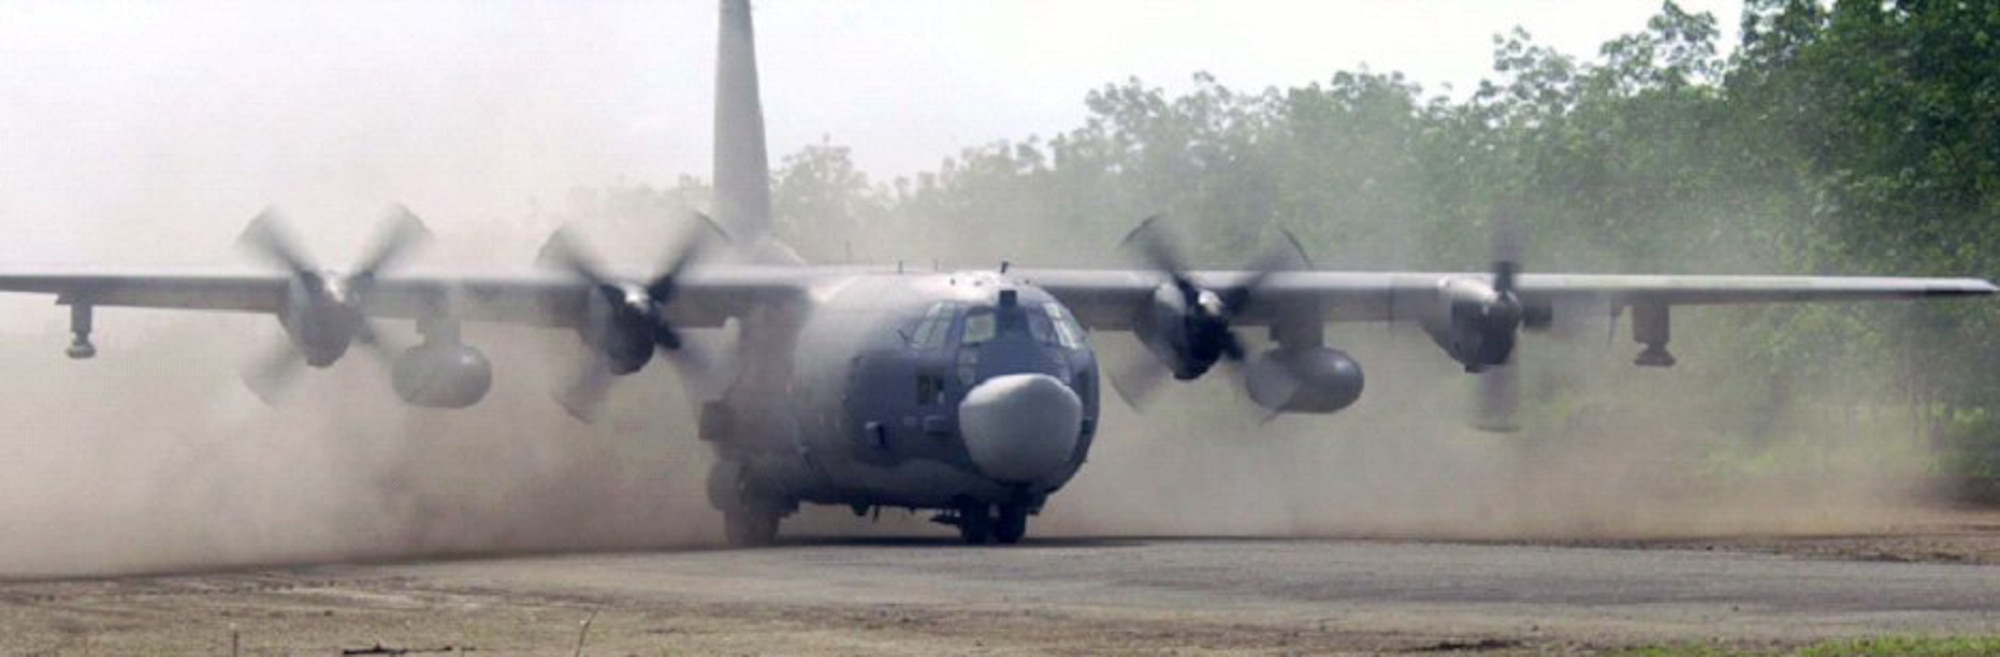 A MC-130 Combat Talon II from the 15th Special Operations Squadron lands on a dirt airfield.